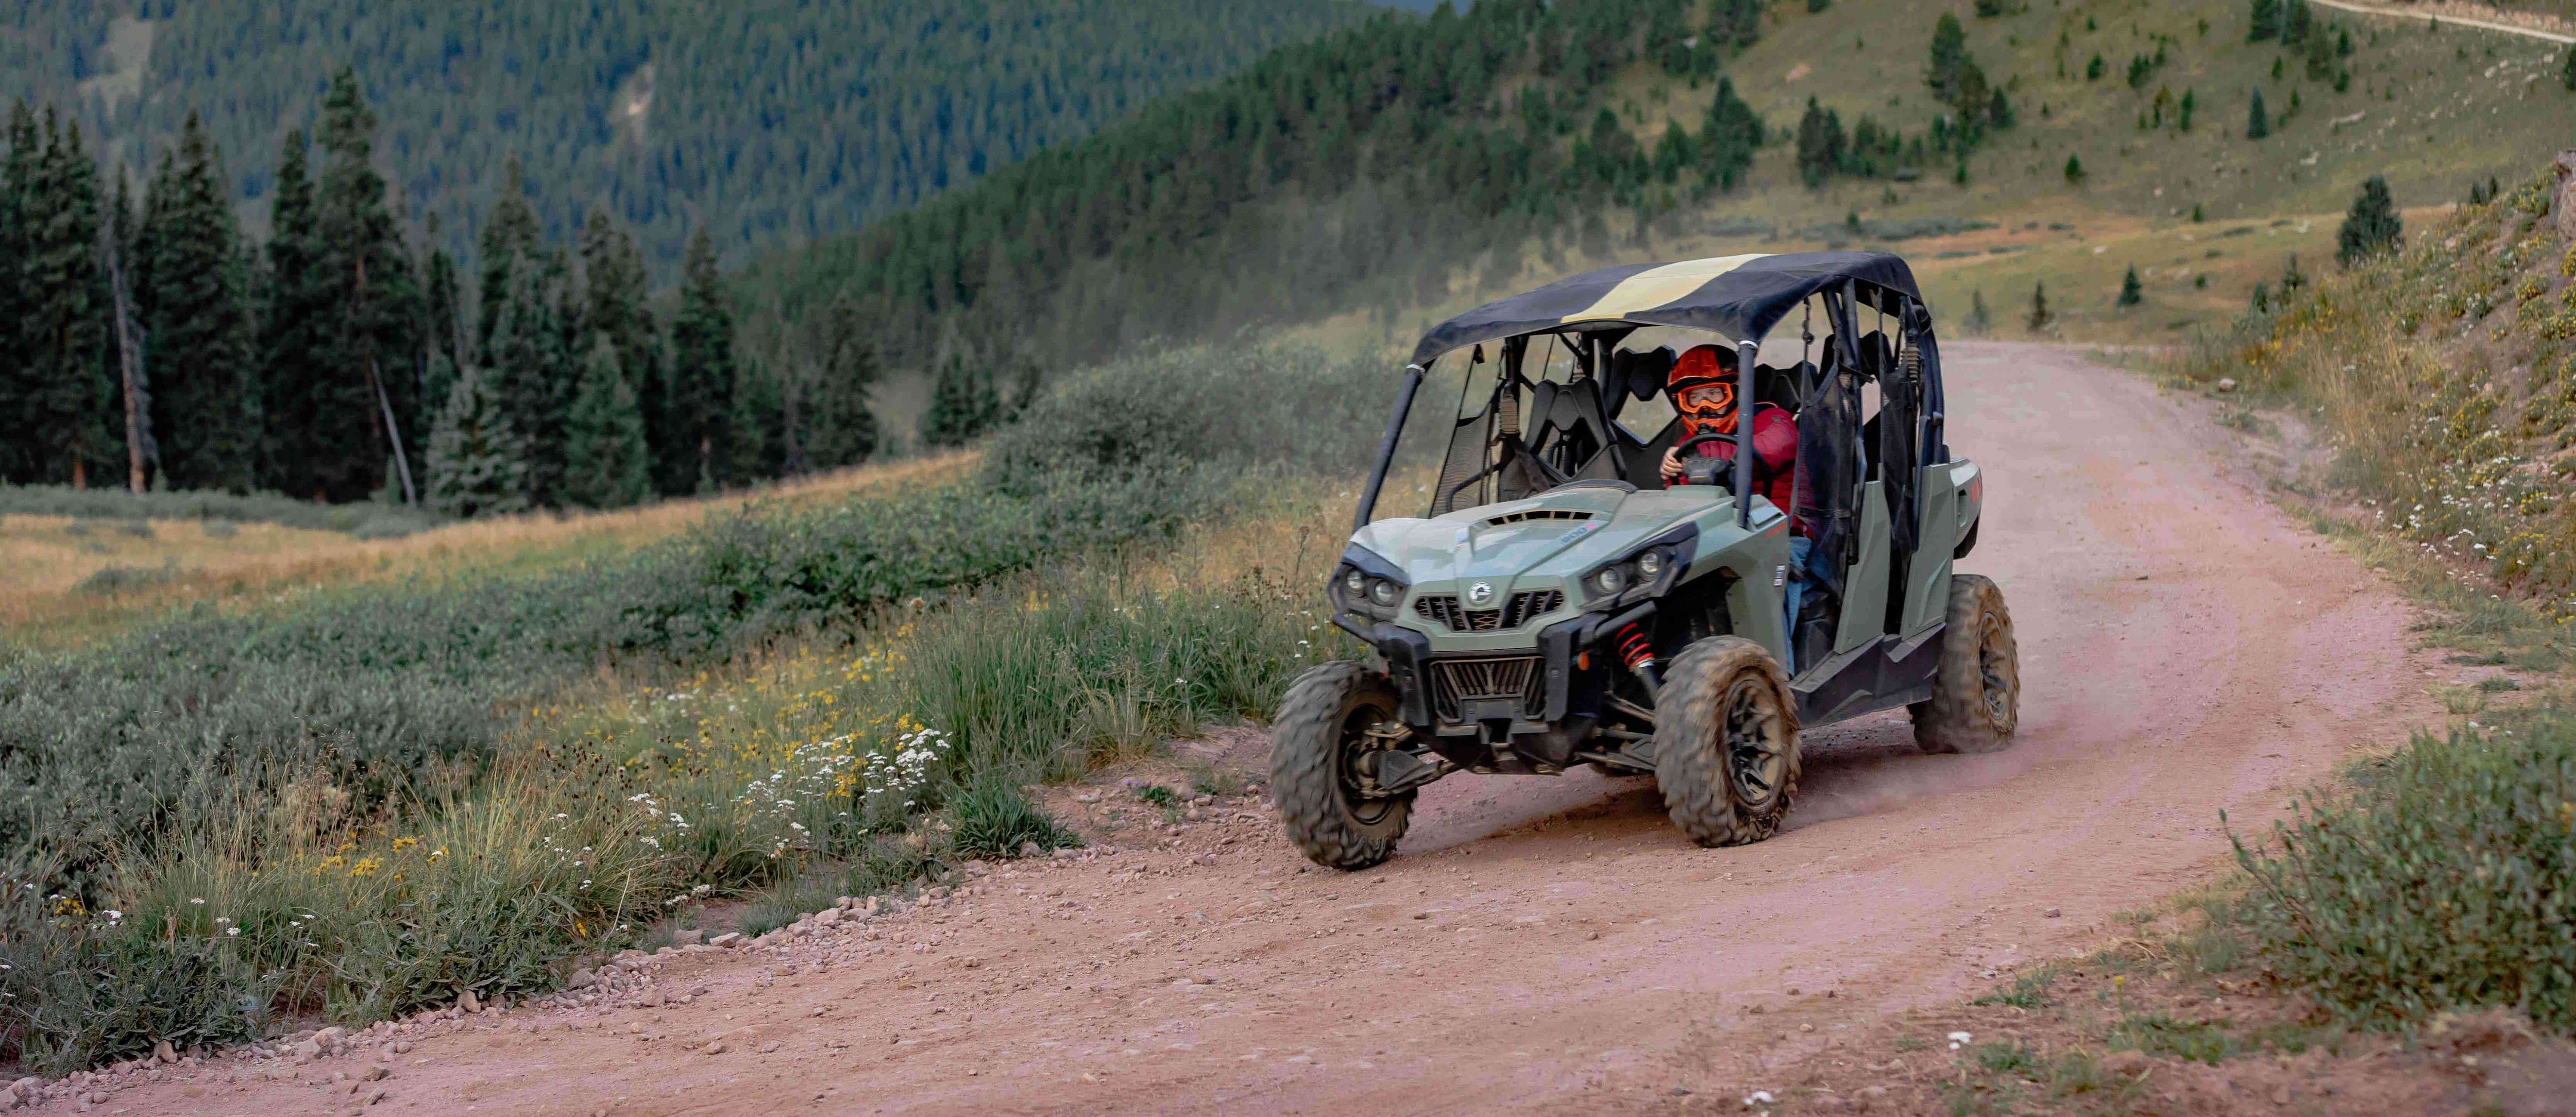 A person riding a Can-Am side-by-side on a trail through the mountains with trees and a blue sky in the back 